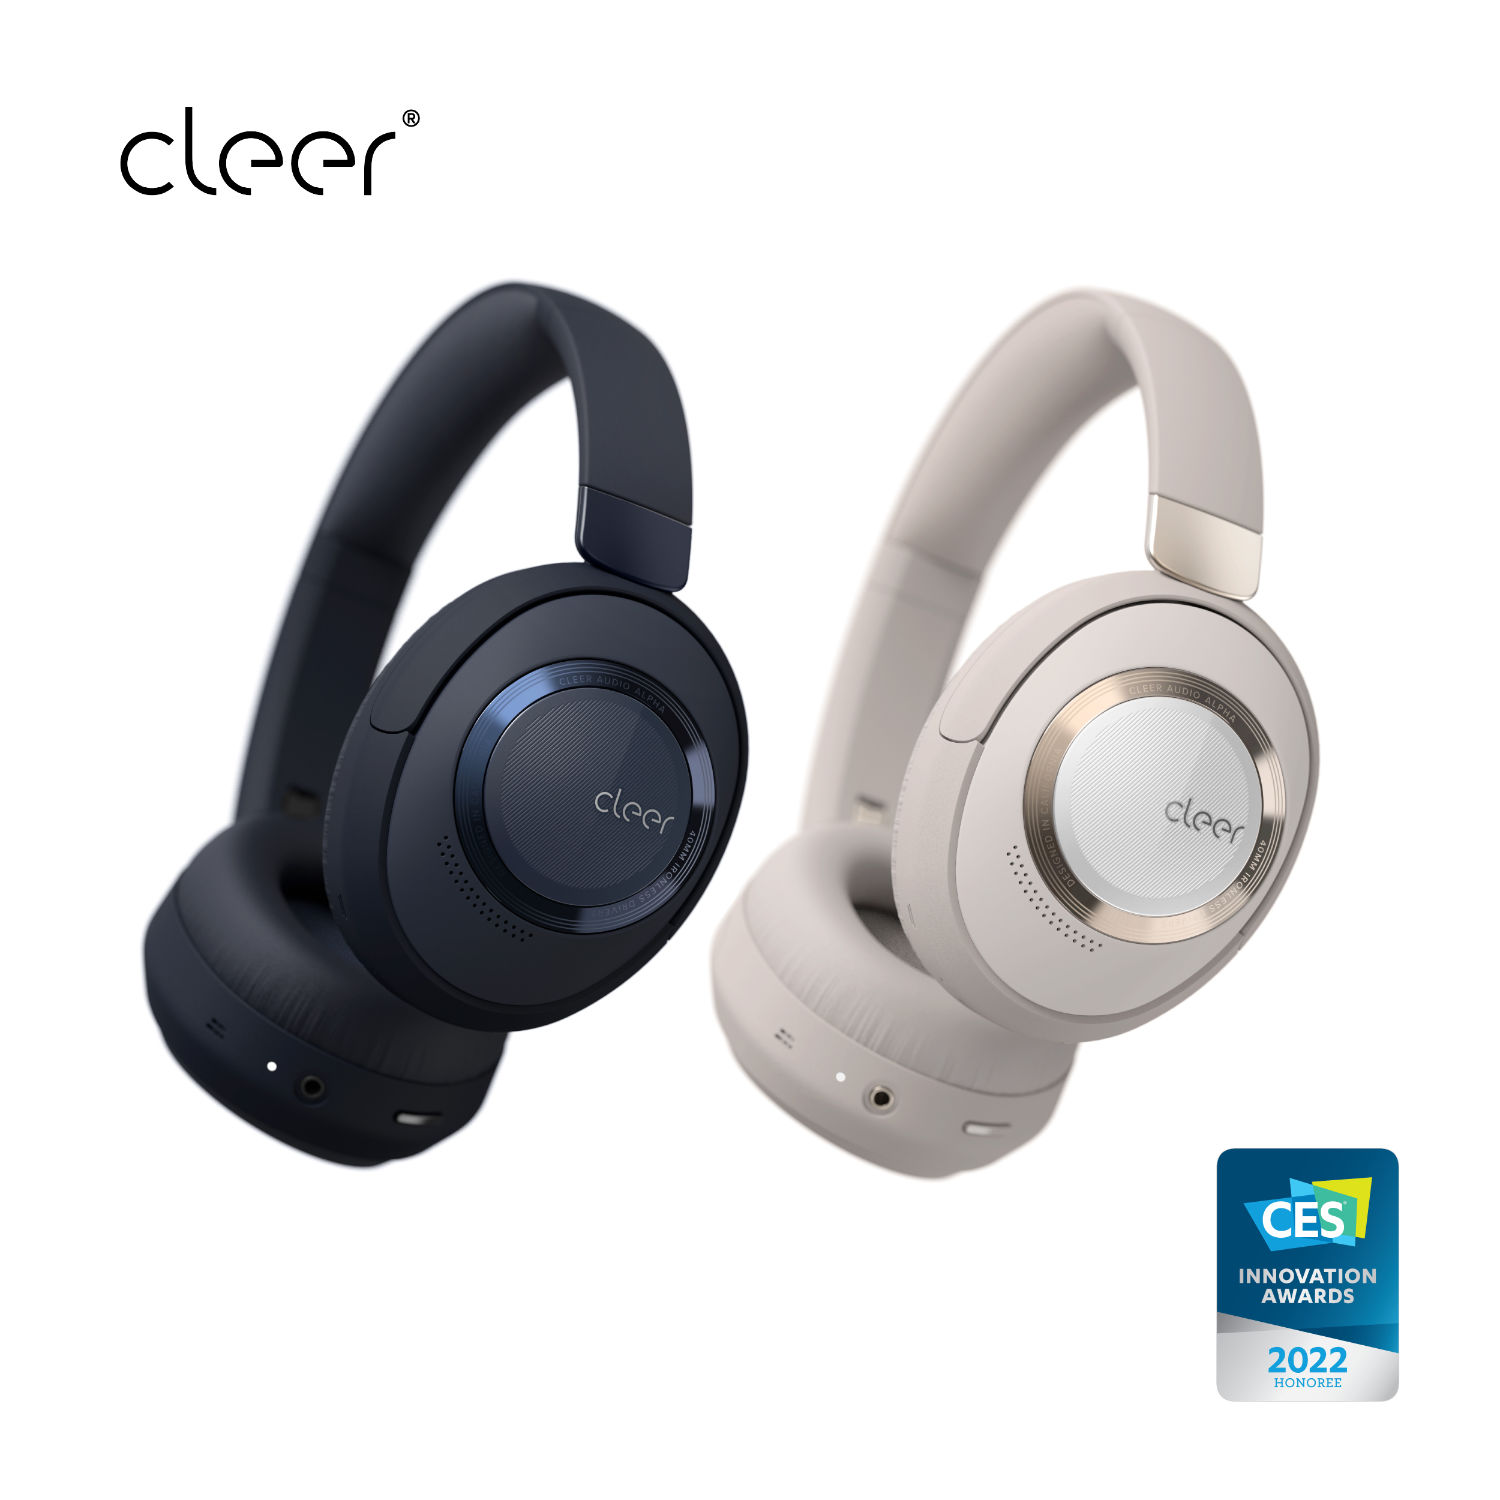 [CES 2022] Cleer Audio announces its ALPHA headphones with "theater-like" sound